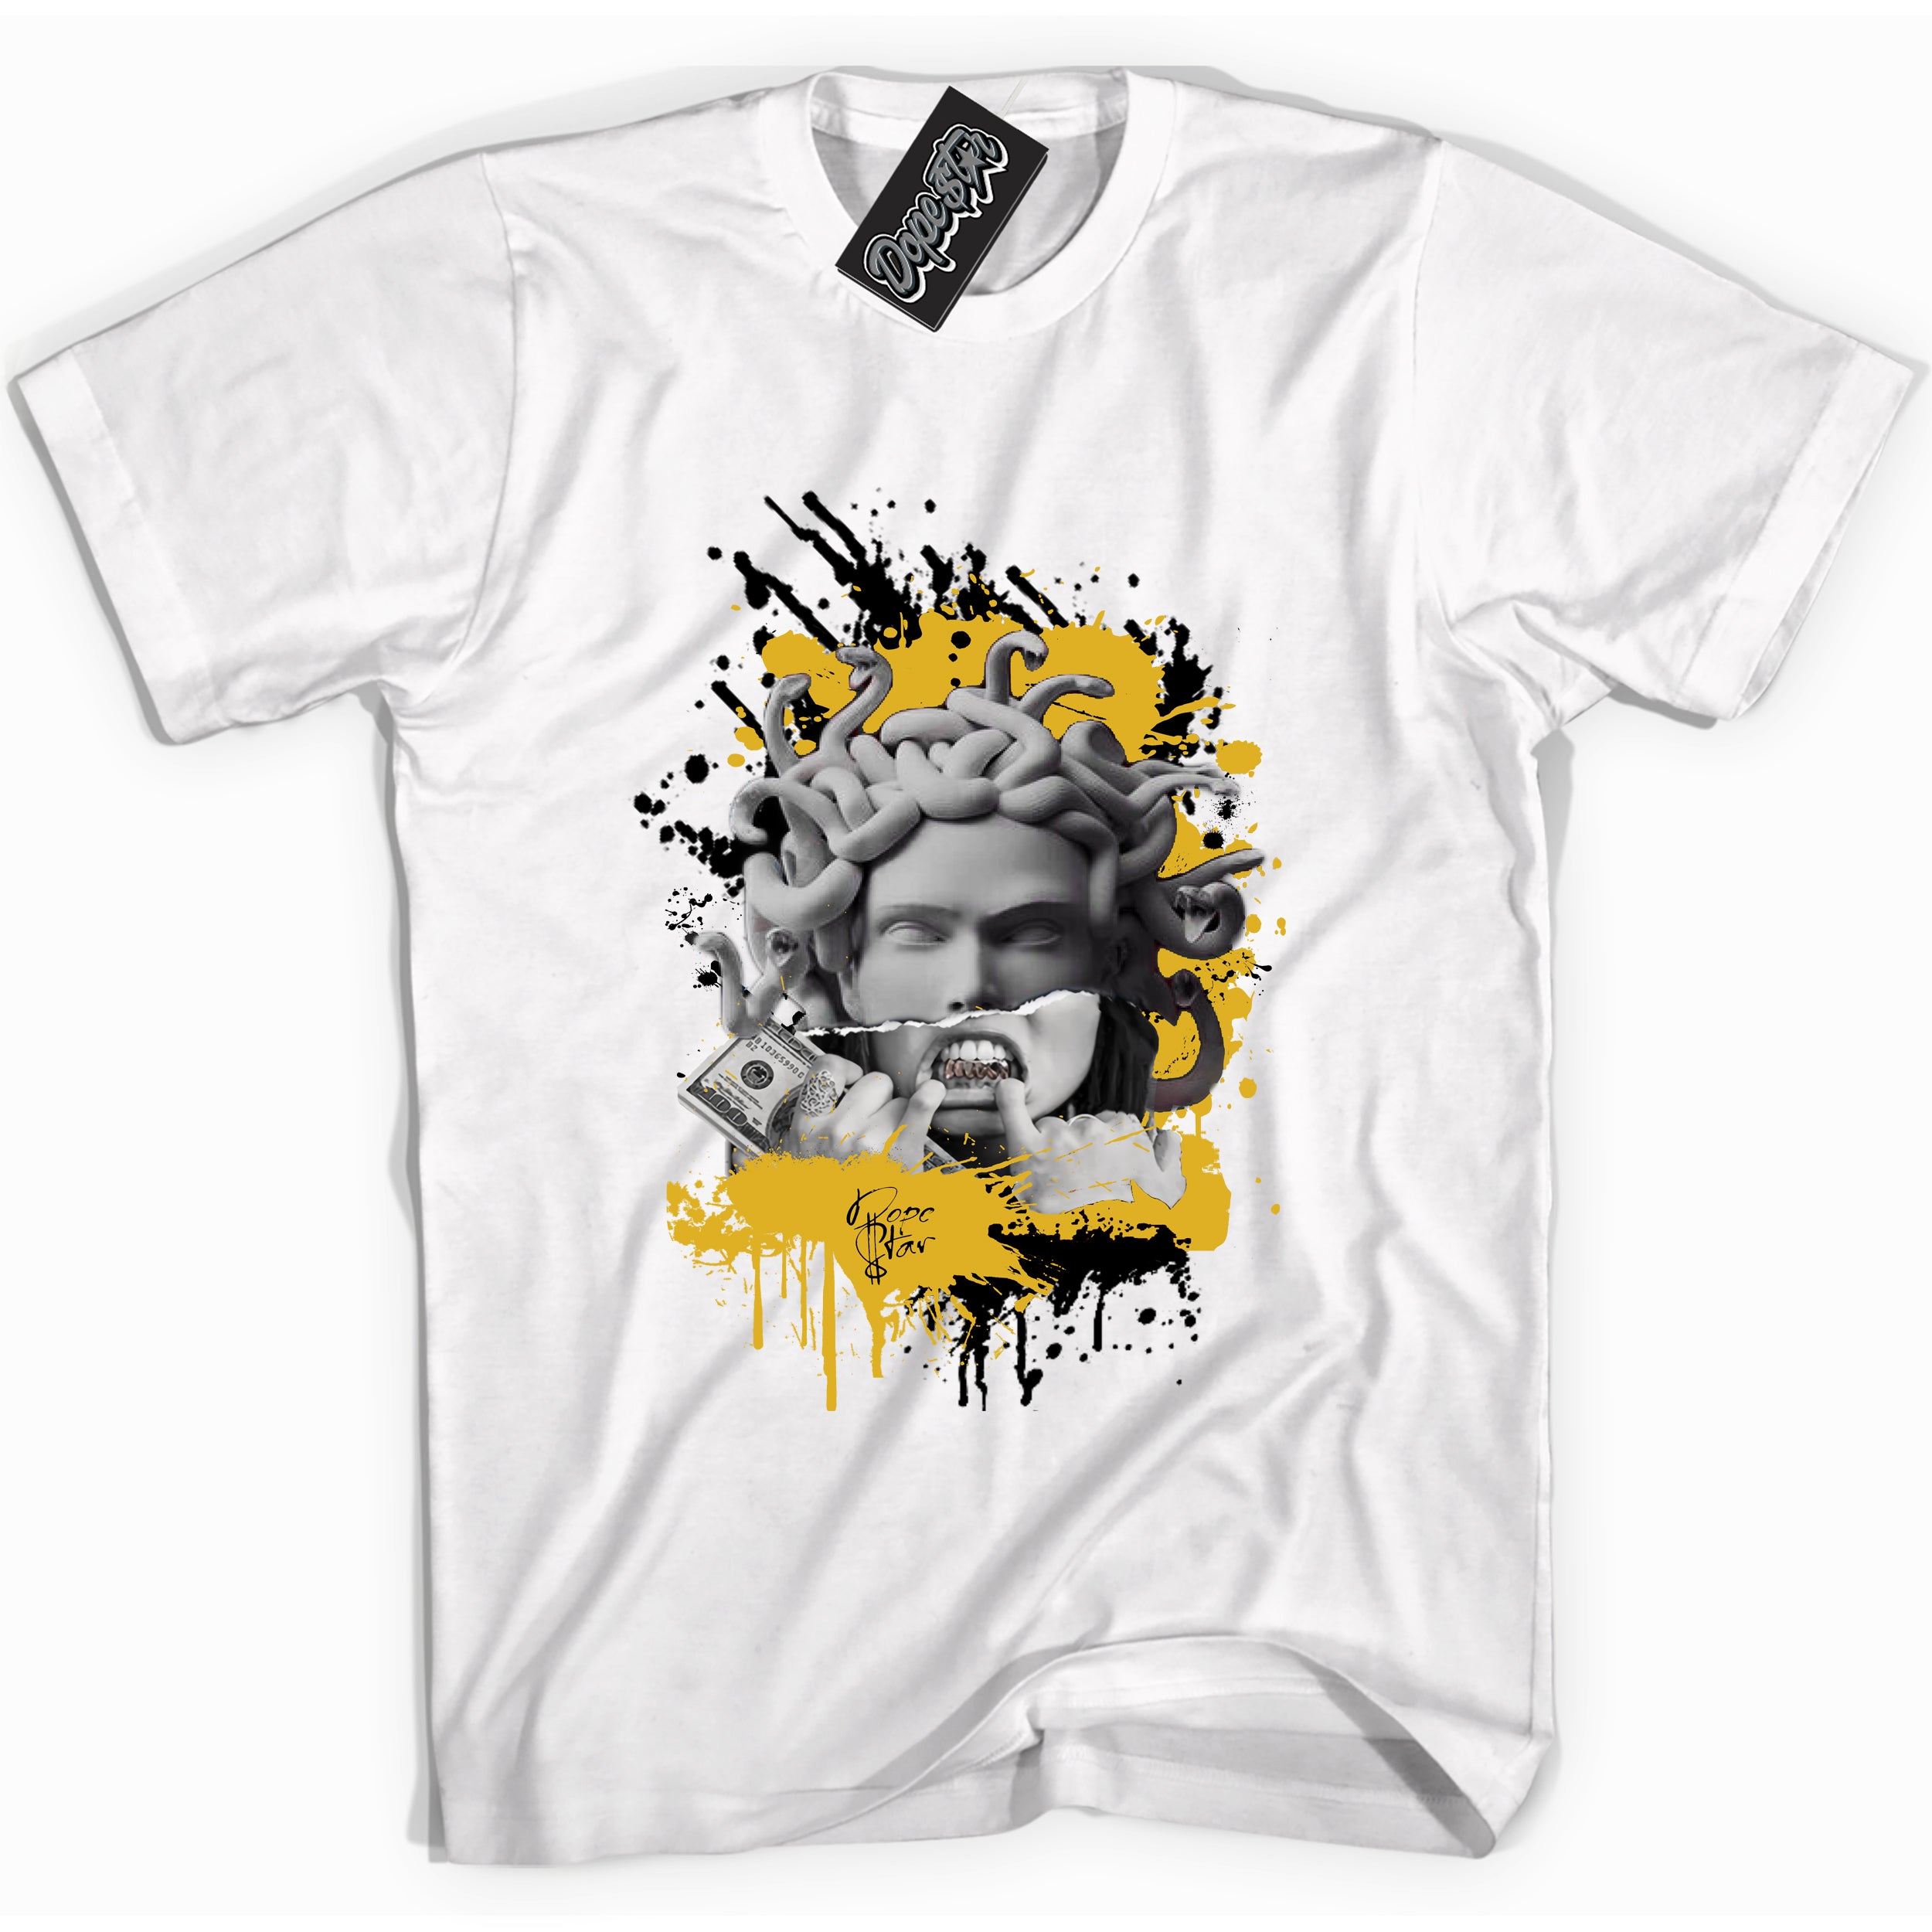 Cool White Shirt with “ Medusa” design that perfectly matches Yellow Ochre 6s Sneakers.